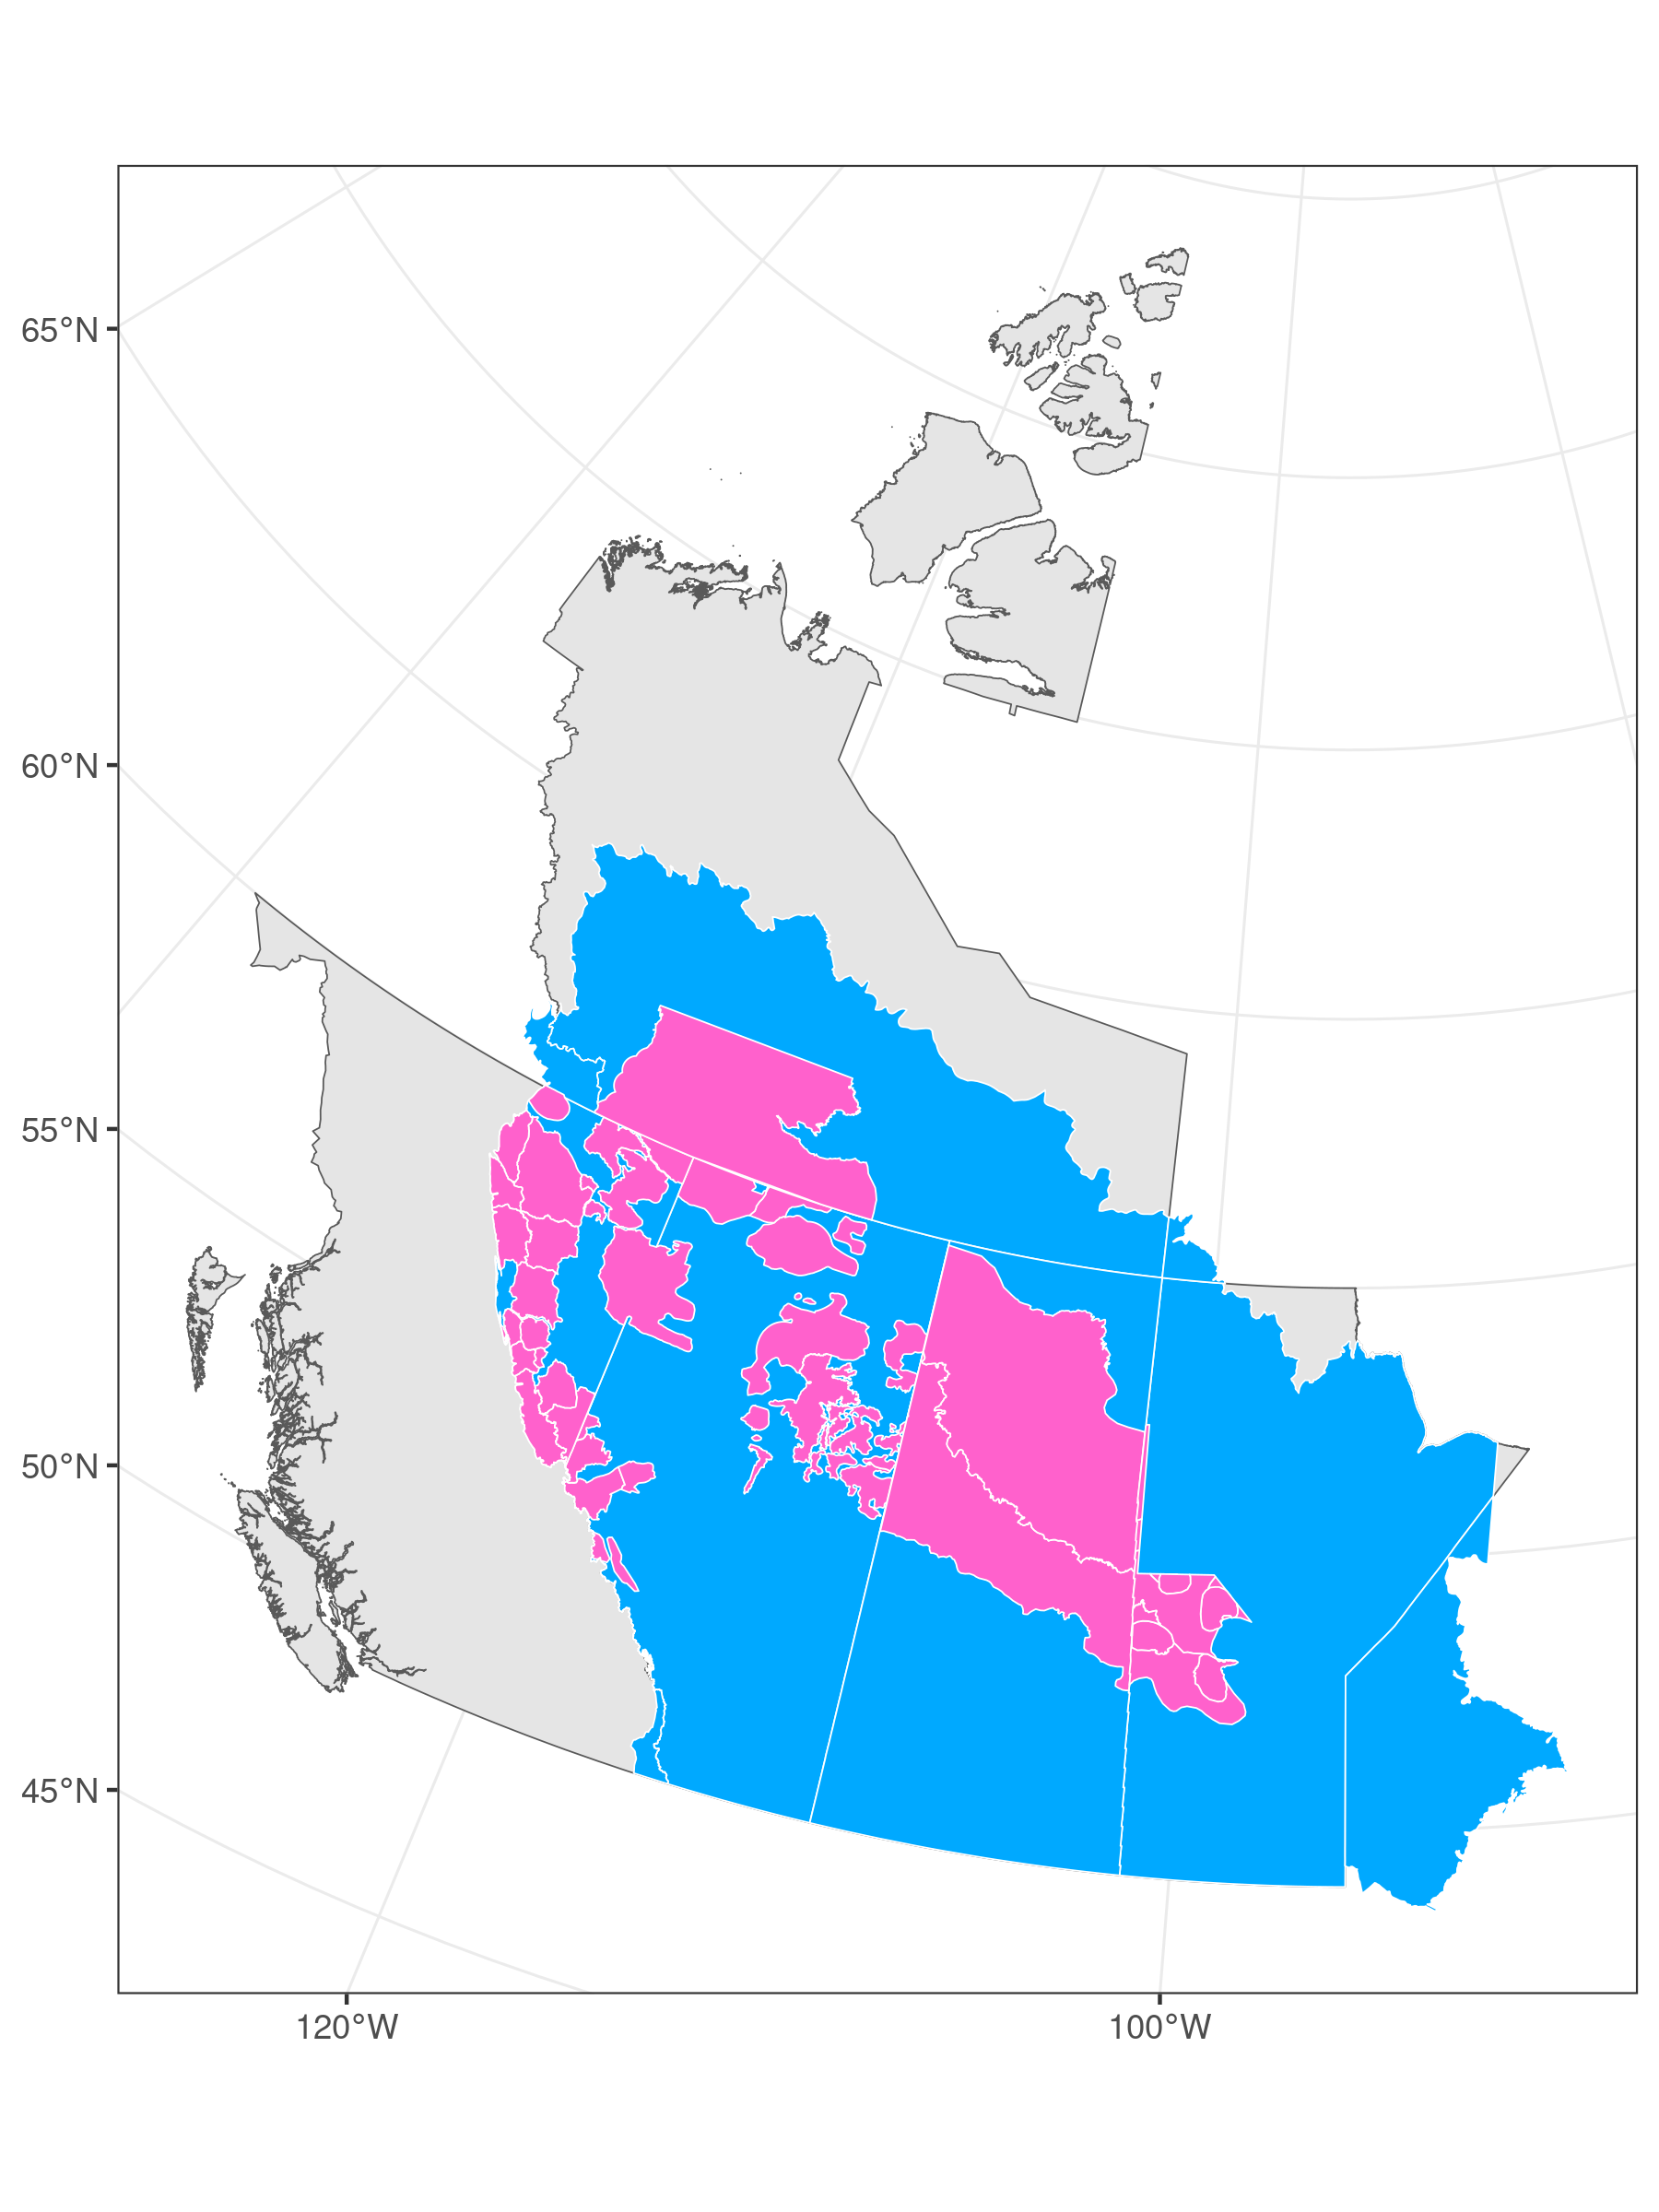 LandWeb study area (blue) with mountain and boreal caribou ranges highlighted (pink).